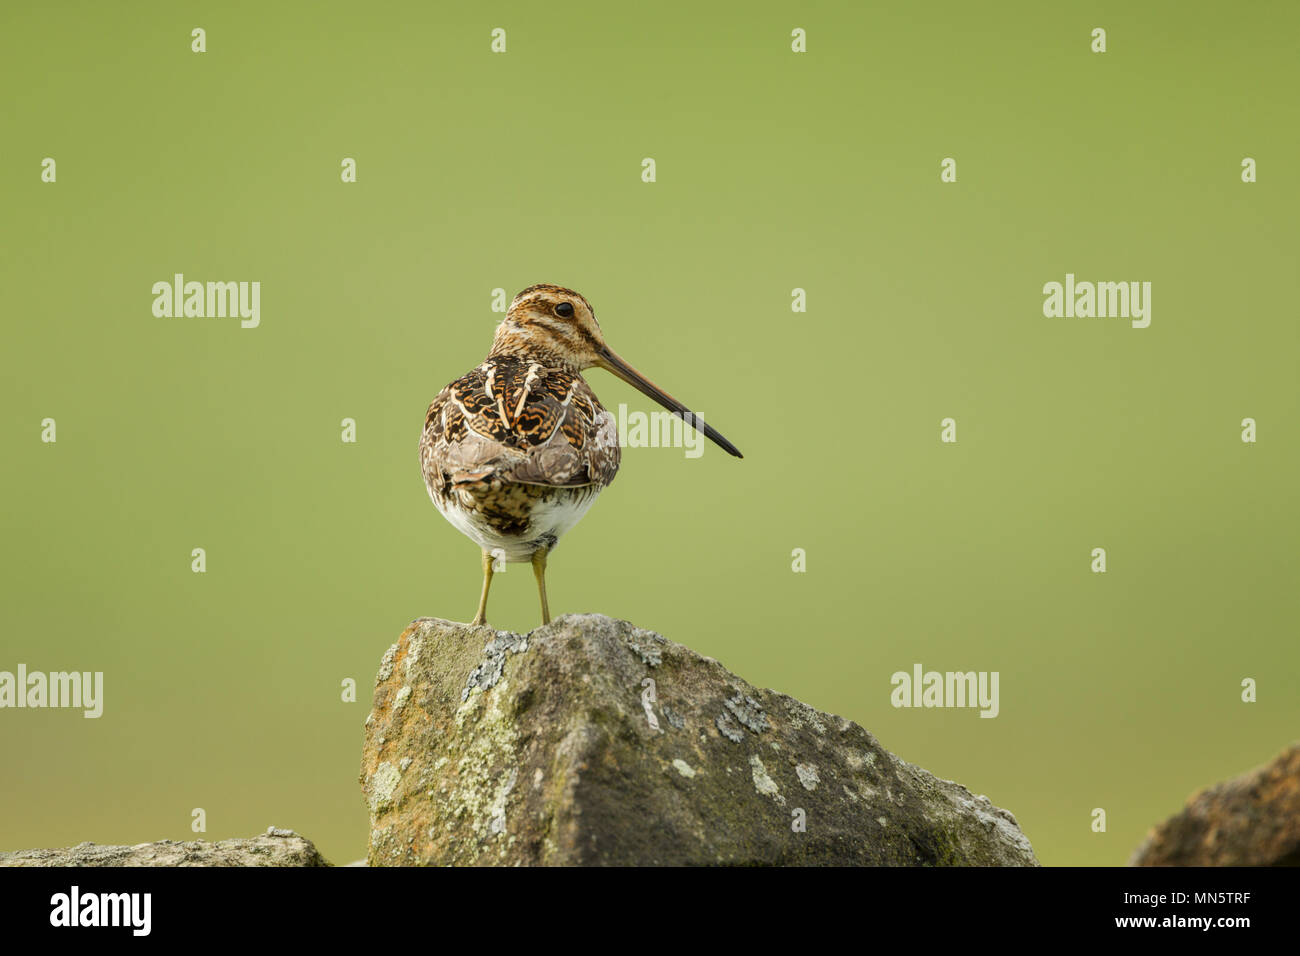 Common snipe, Latin name Gallinago gallinago, standing on a stone wall, rear view with head turned showing plumage details and length of beak. Stock Photo